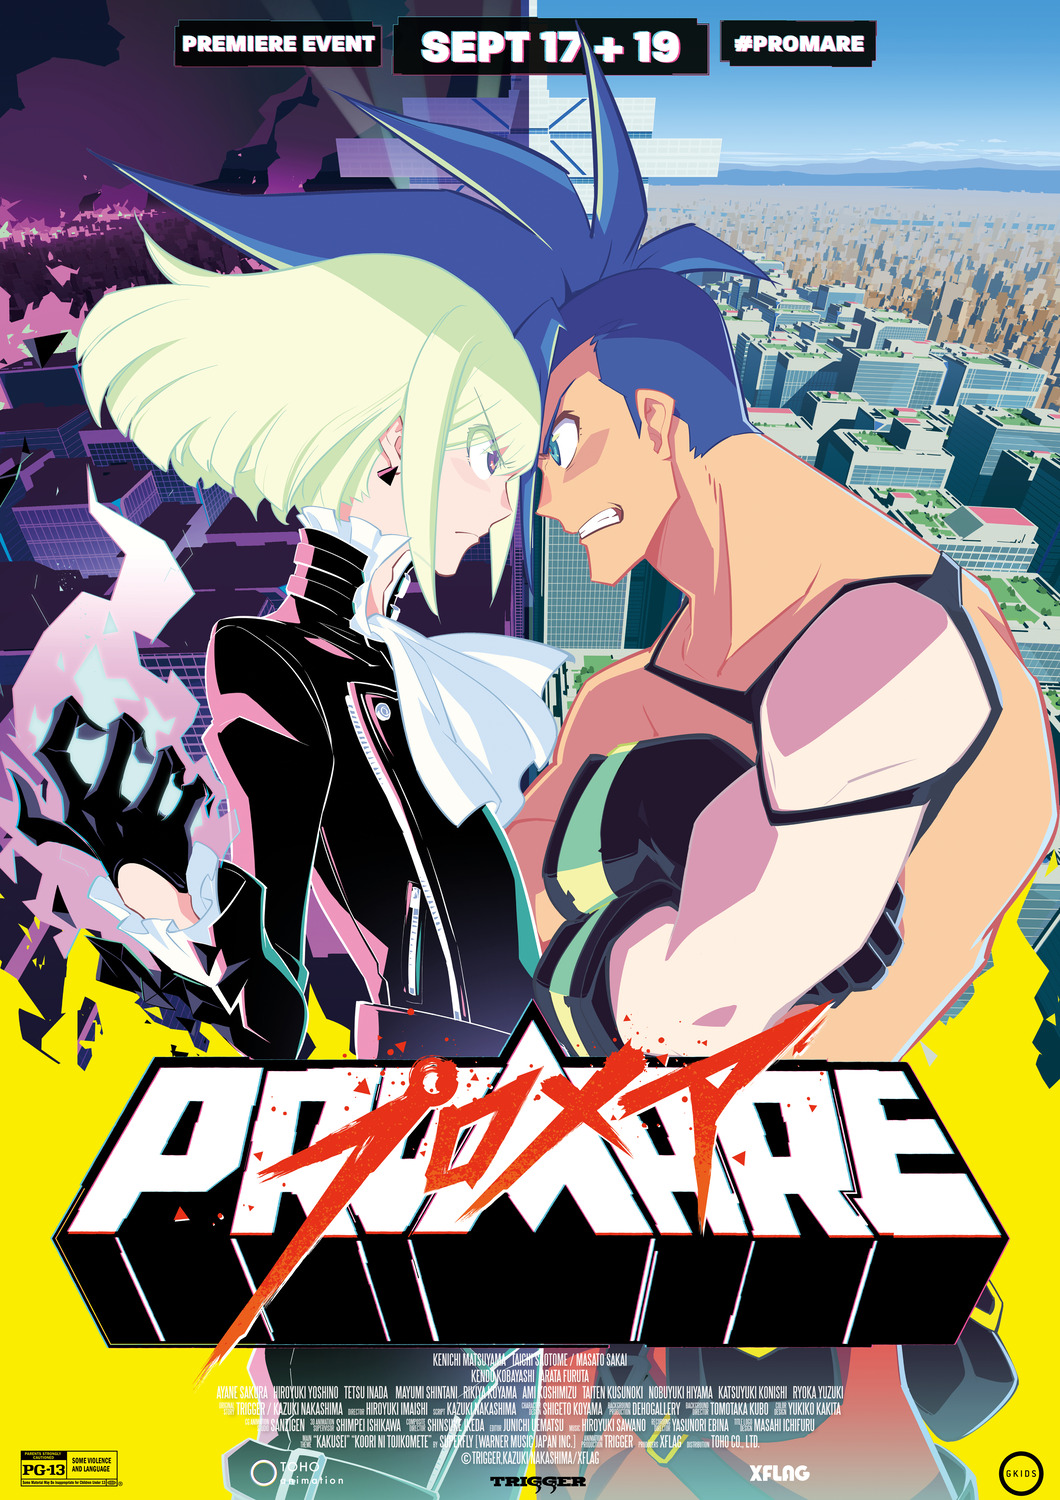 Extra Large Movie Poster Image for Promare 